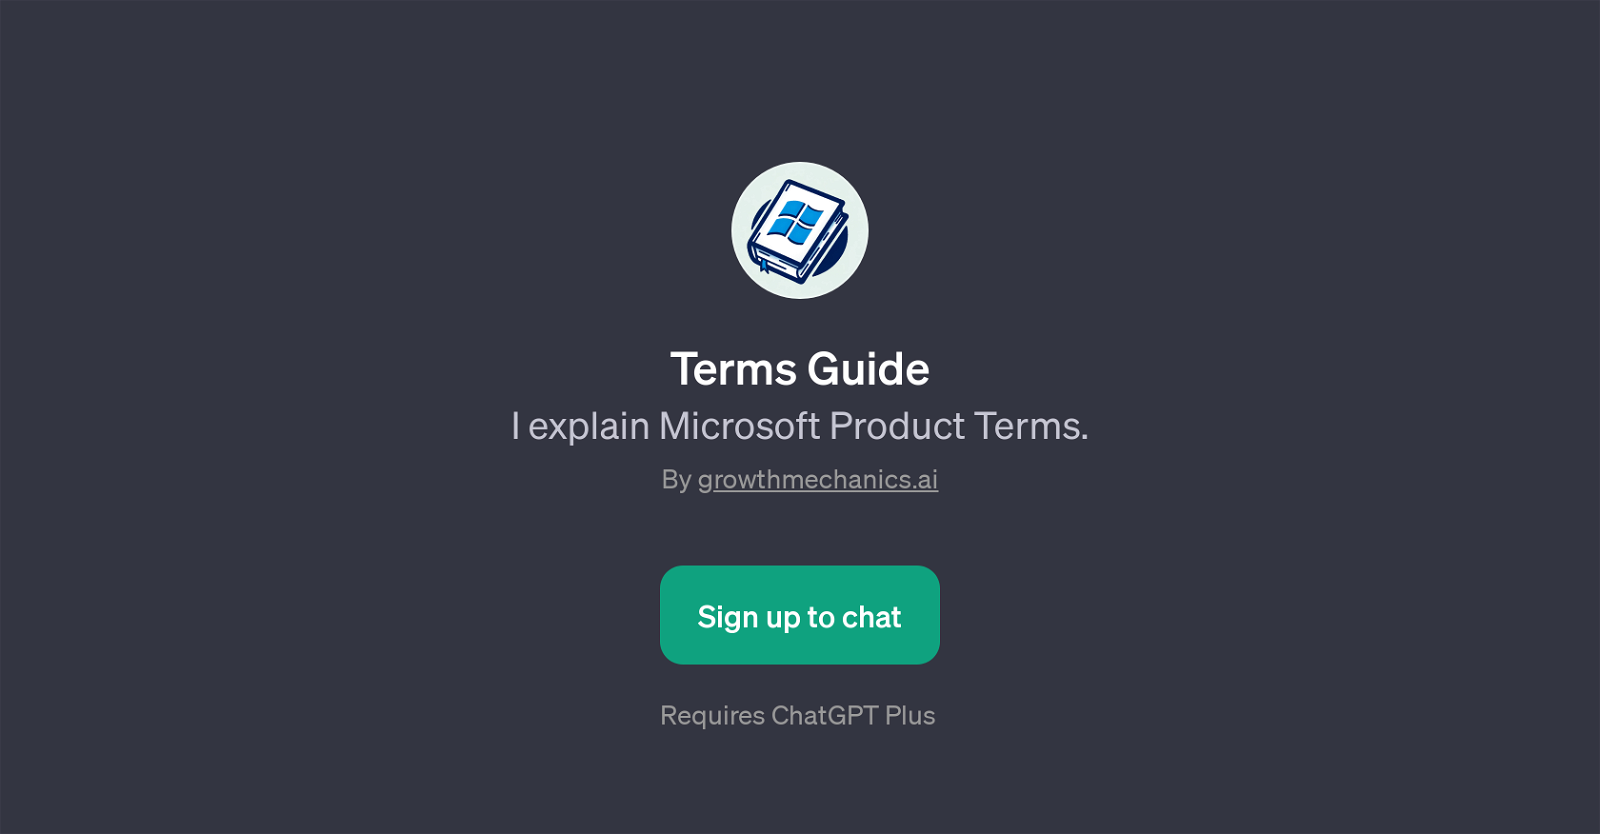 Terms Guide website